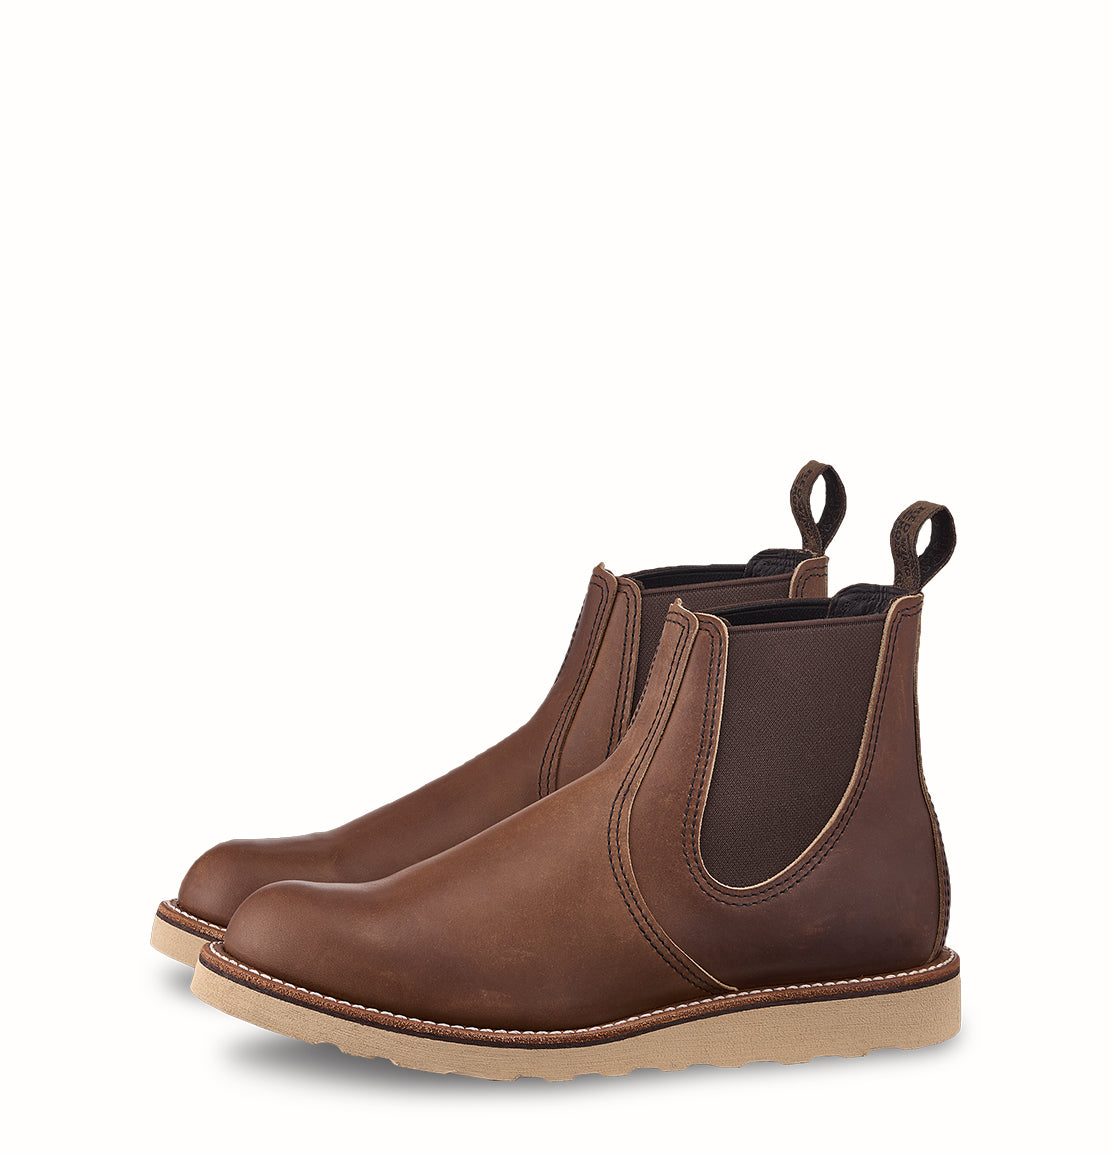 Redwing chelsea boot 3190 amber harness